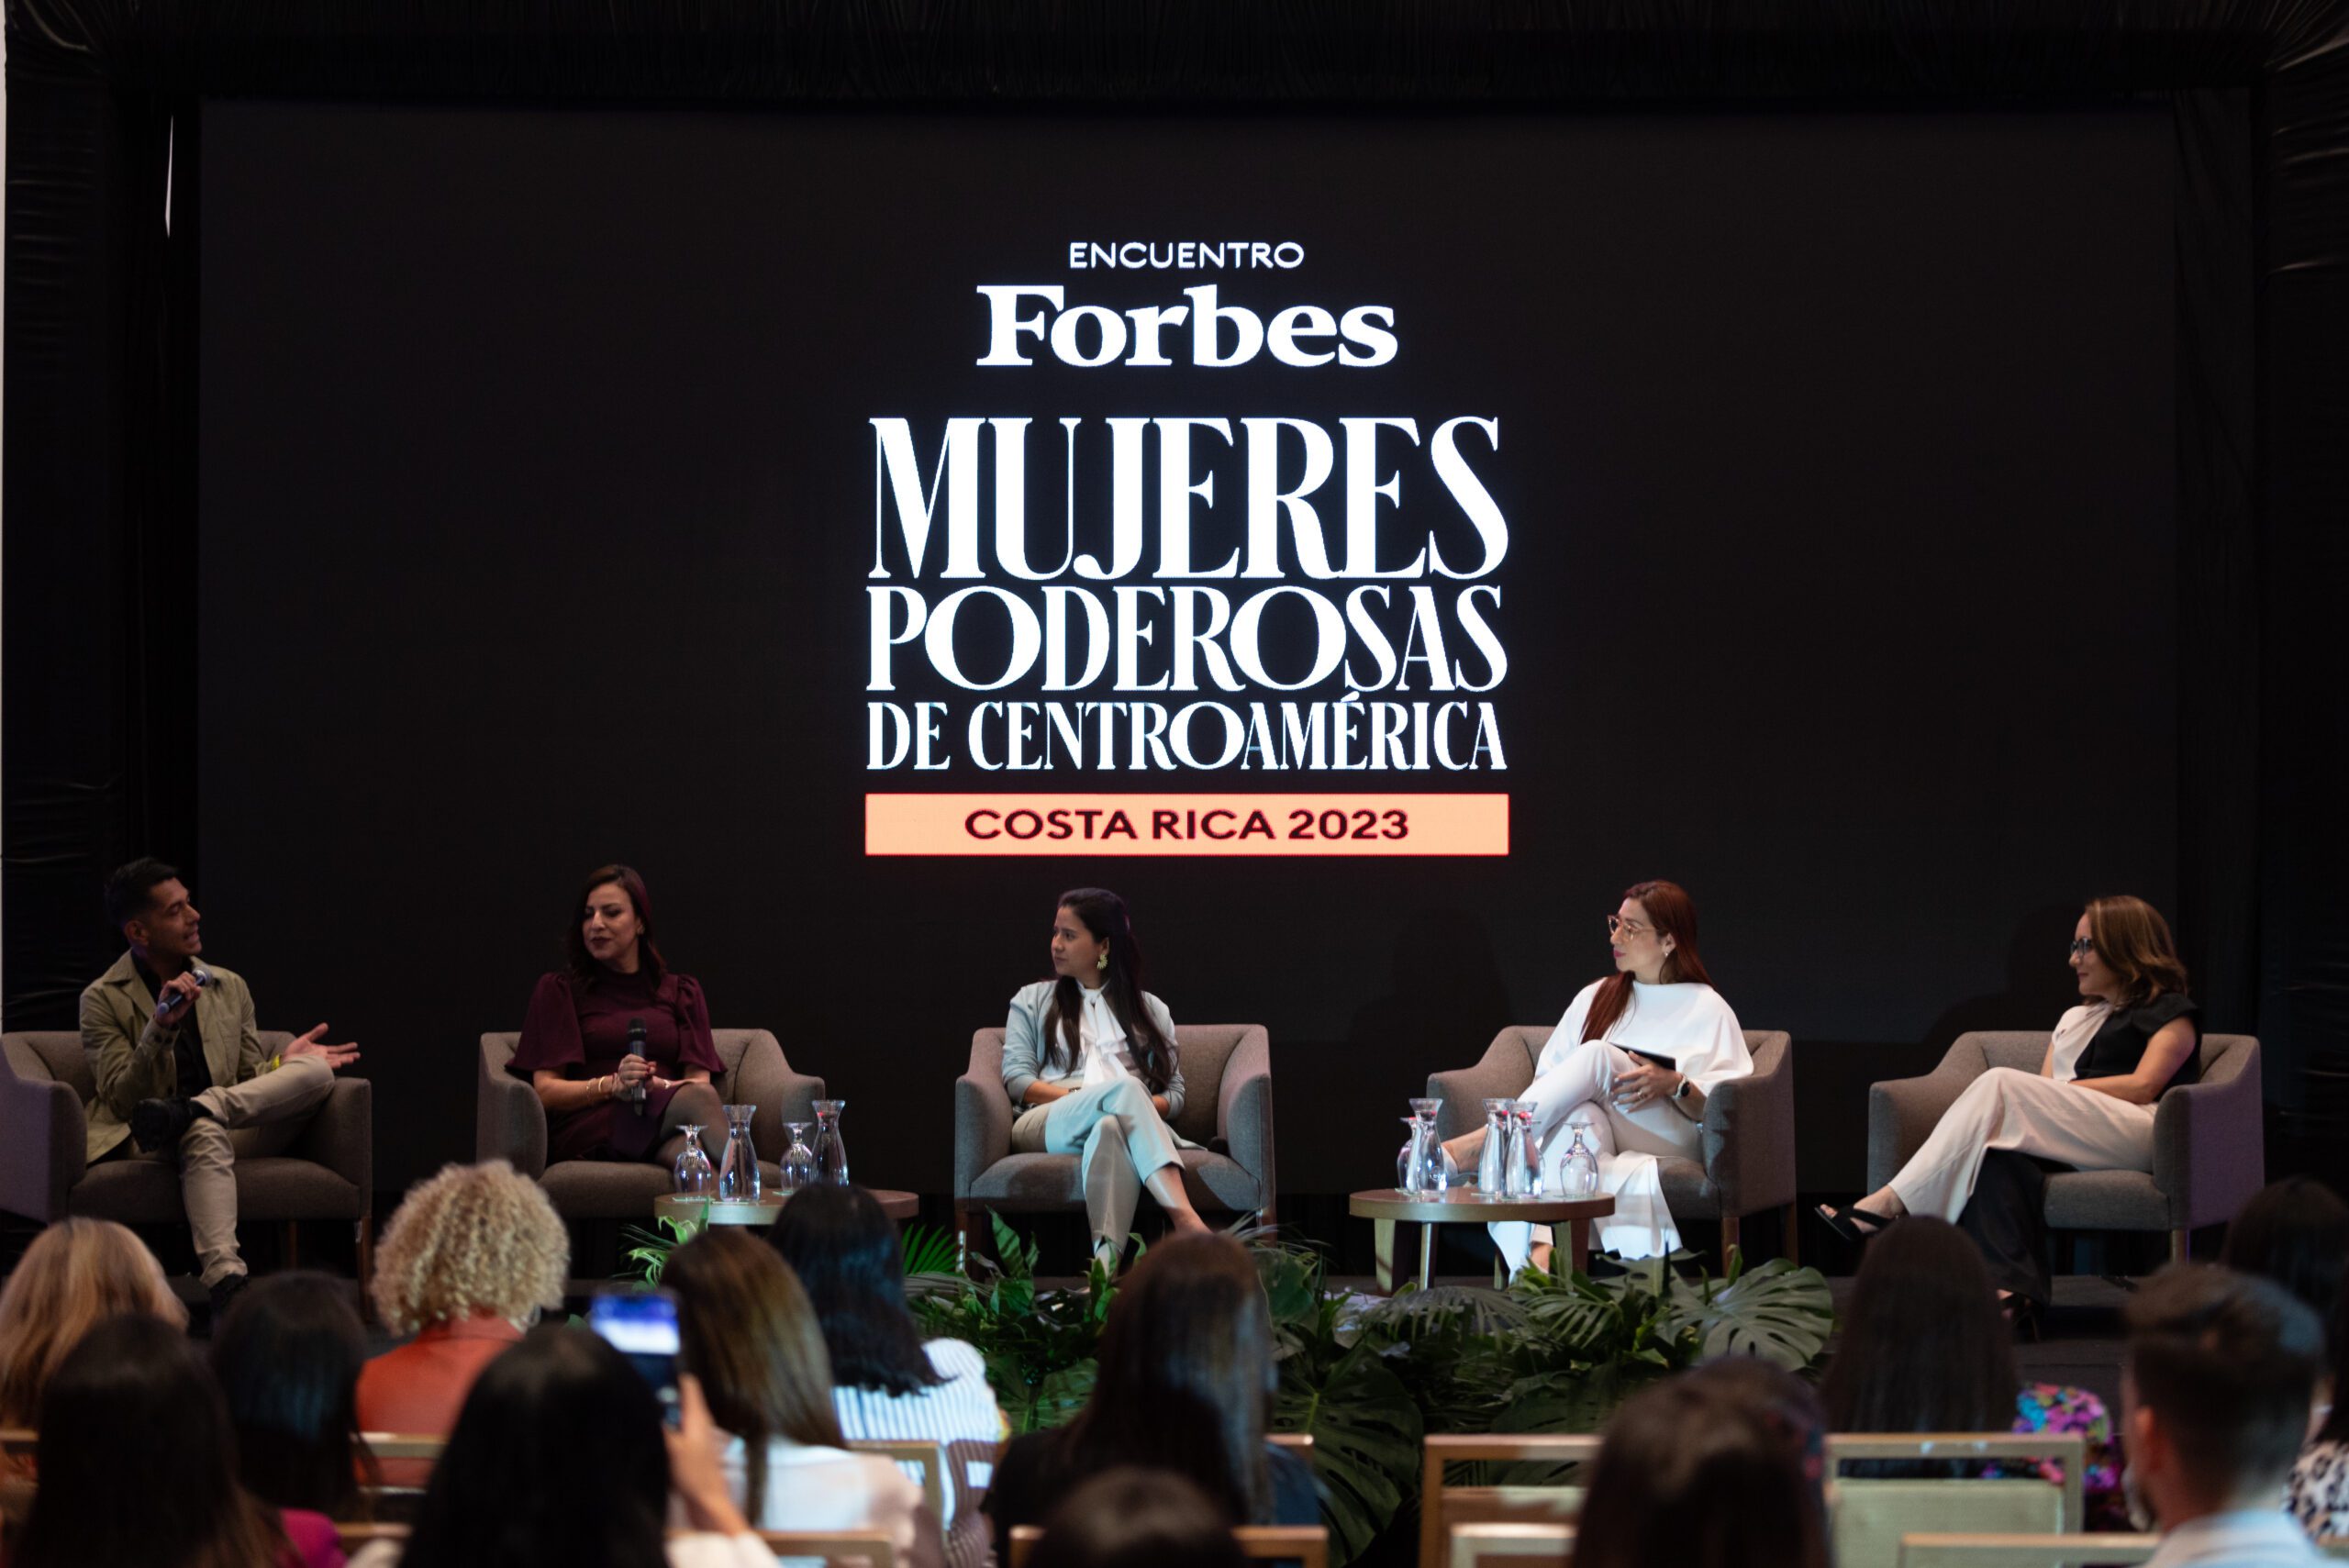 Featured image for the article titled "Empowering Women in Tech Leadership in Latin America" showing a panel of female leaders at the event.